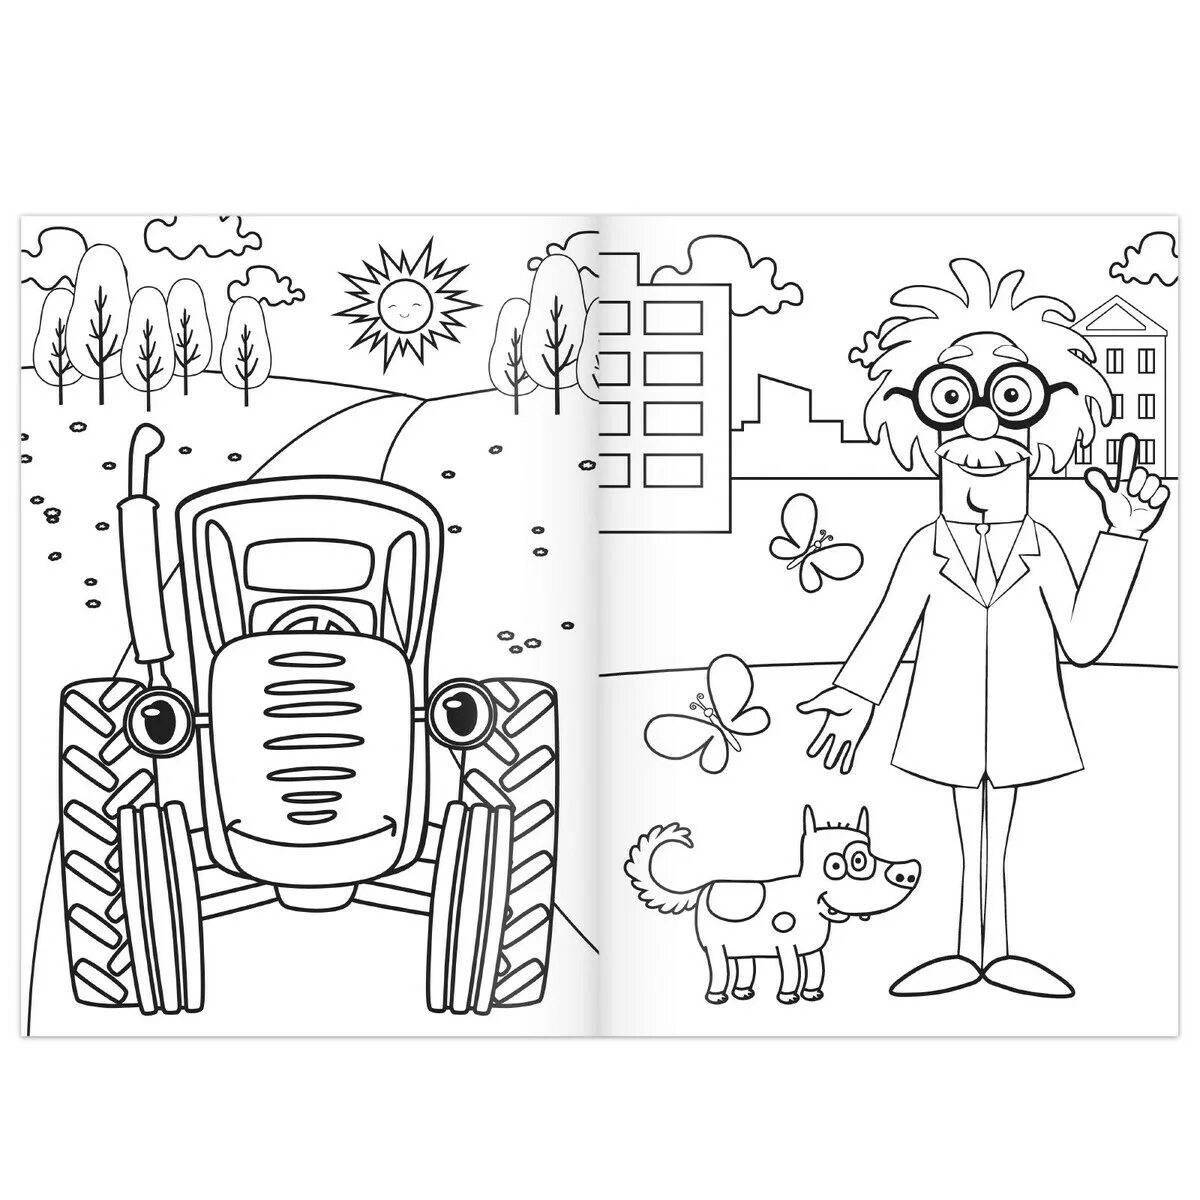 Humorous blue tractor coloring book